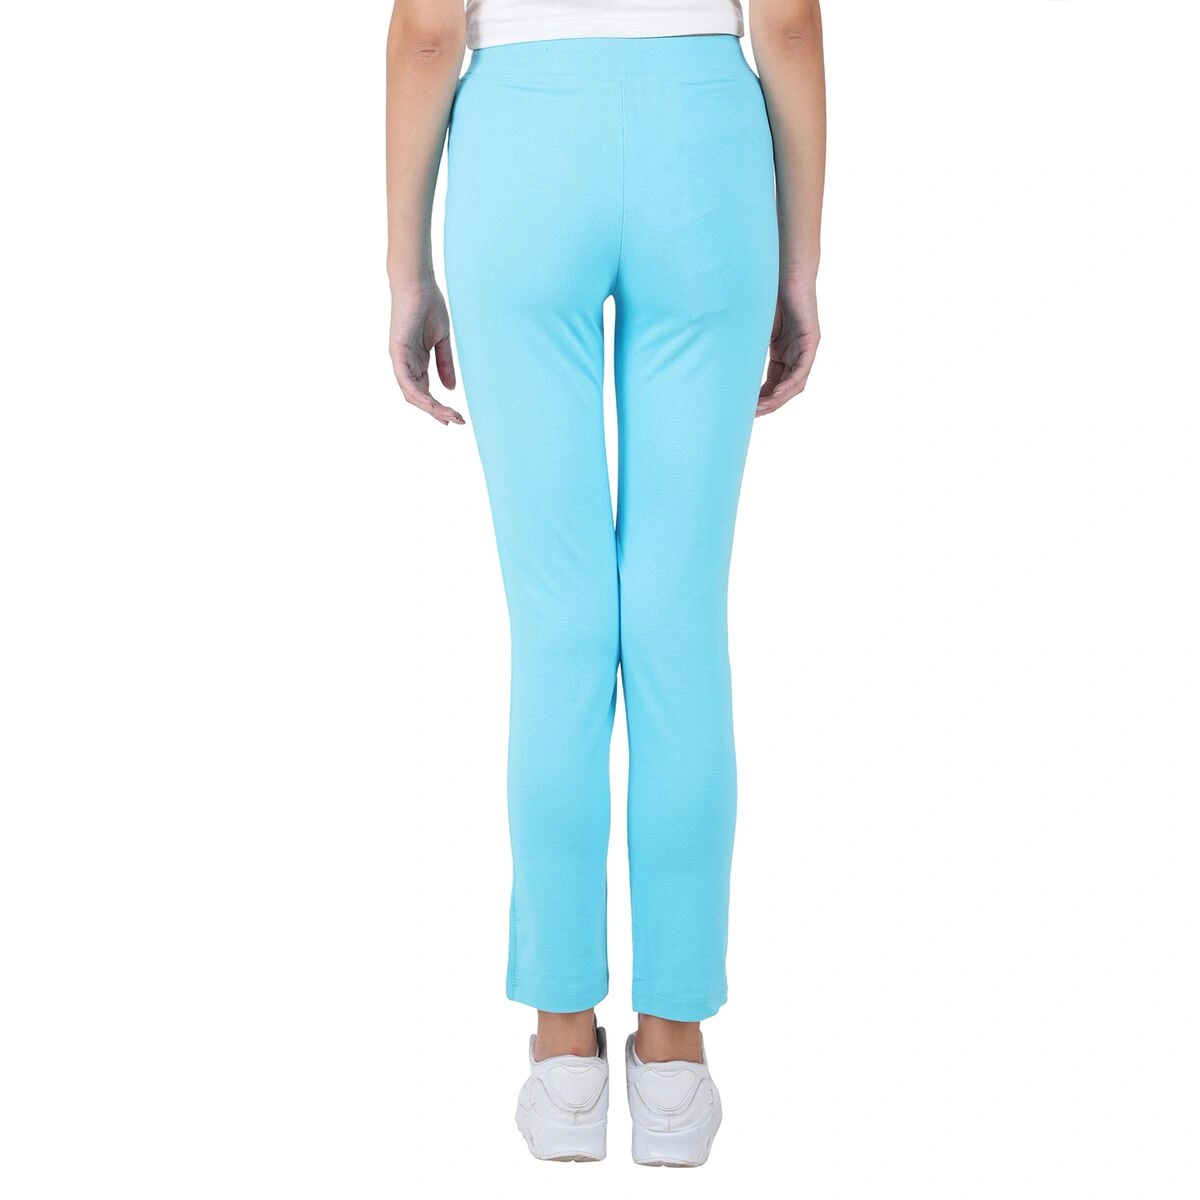 Straight Fit Ladies Blue Cotton Regular Pants at Best Price in Jaipur   Dudani Retail Private Limited